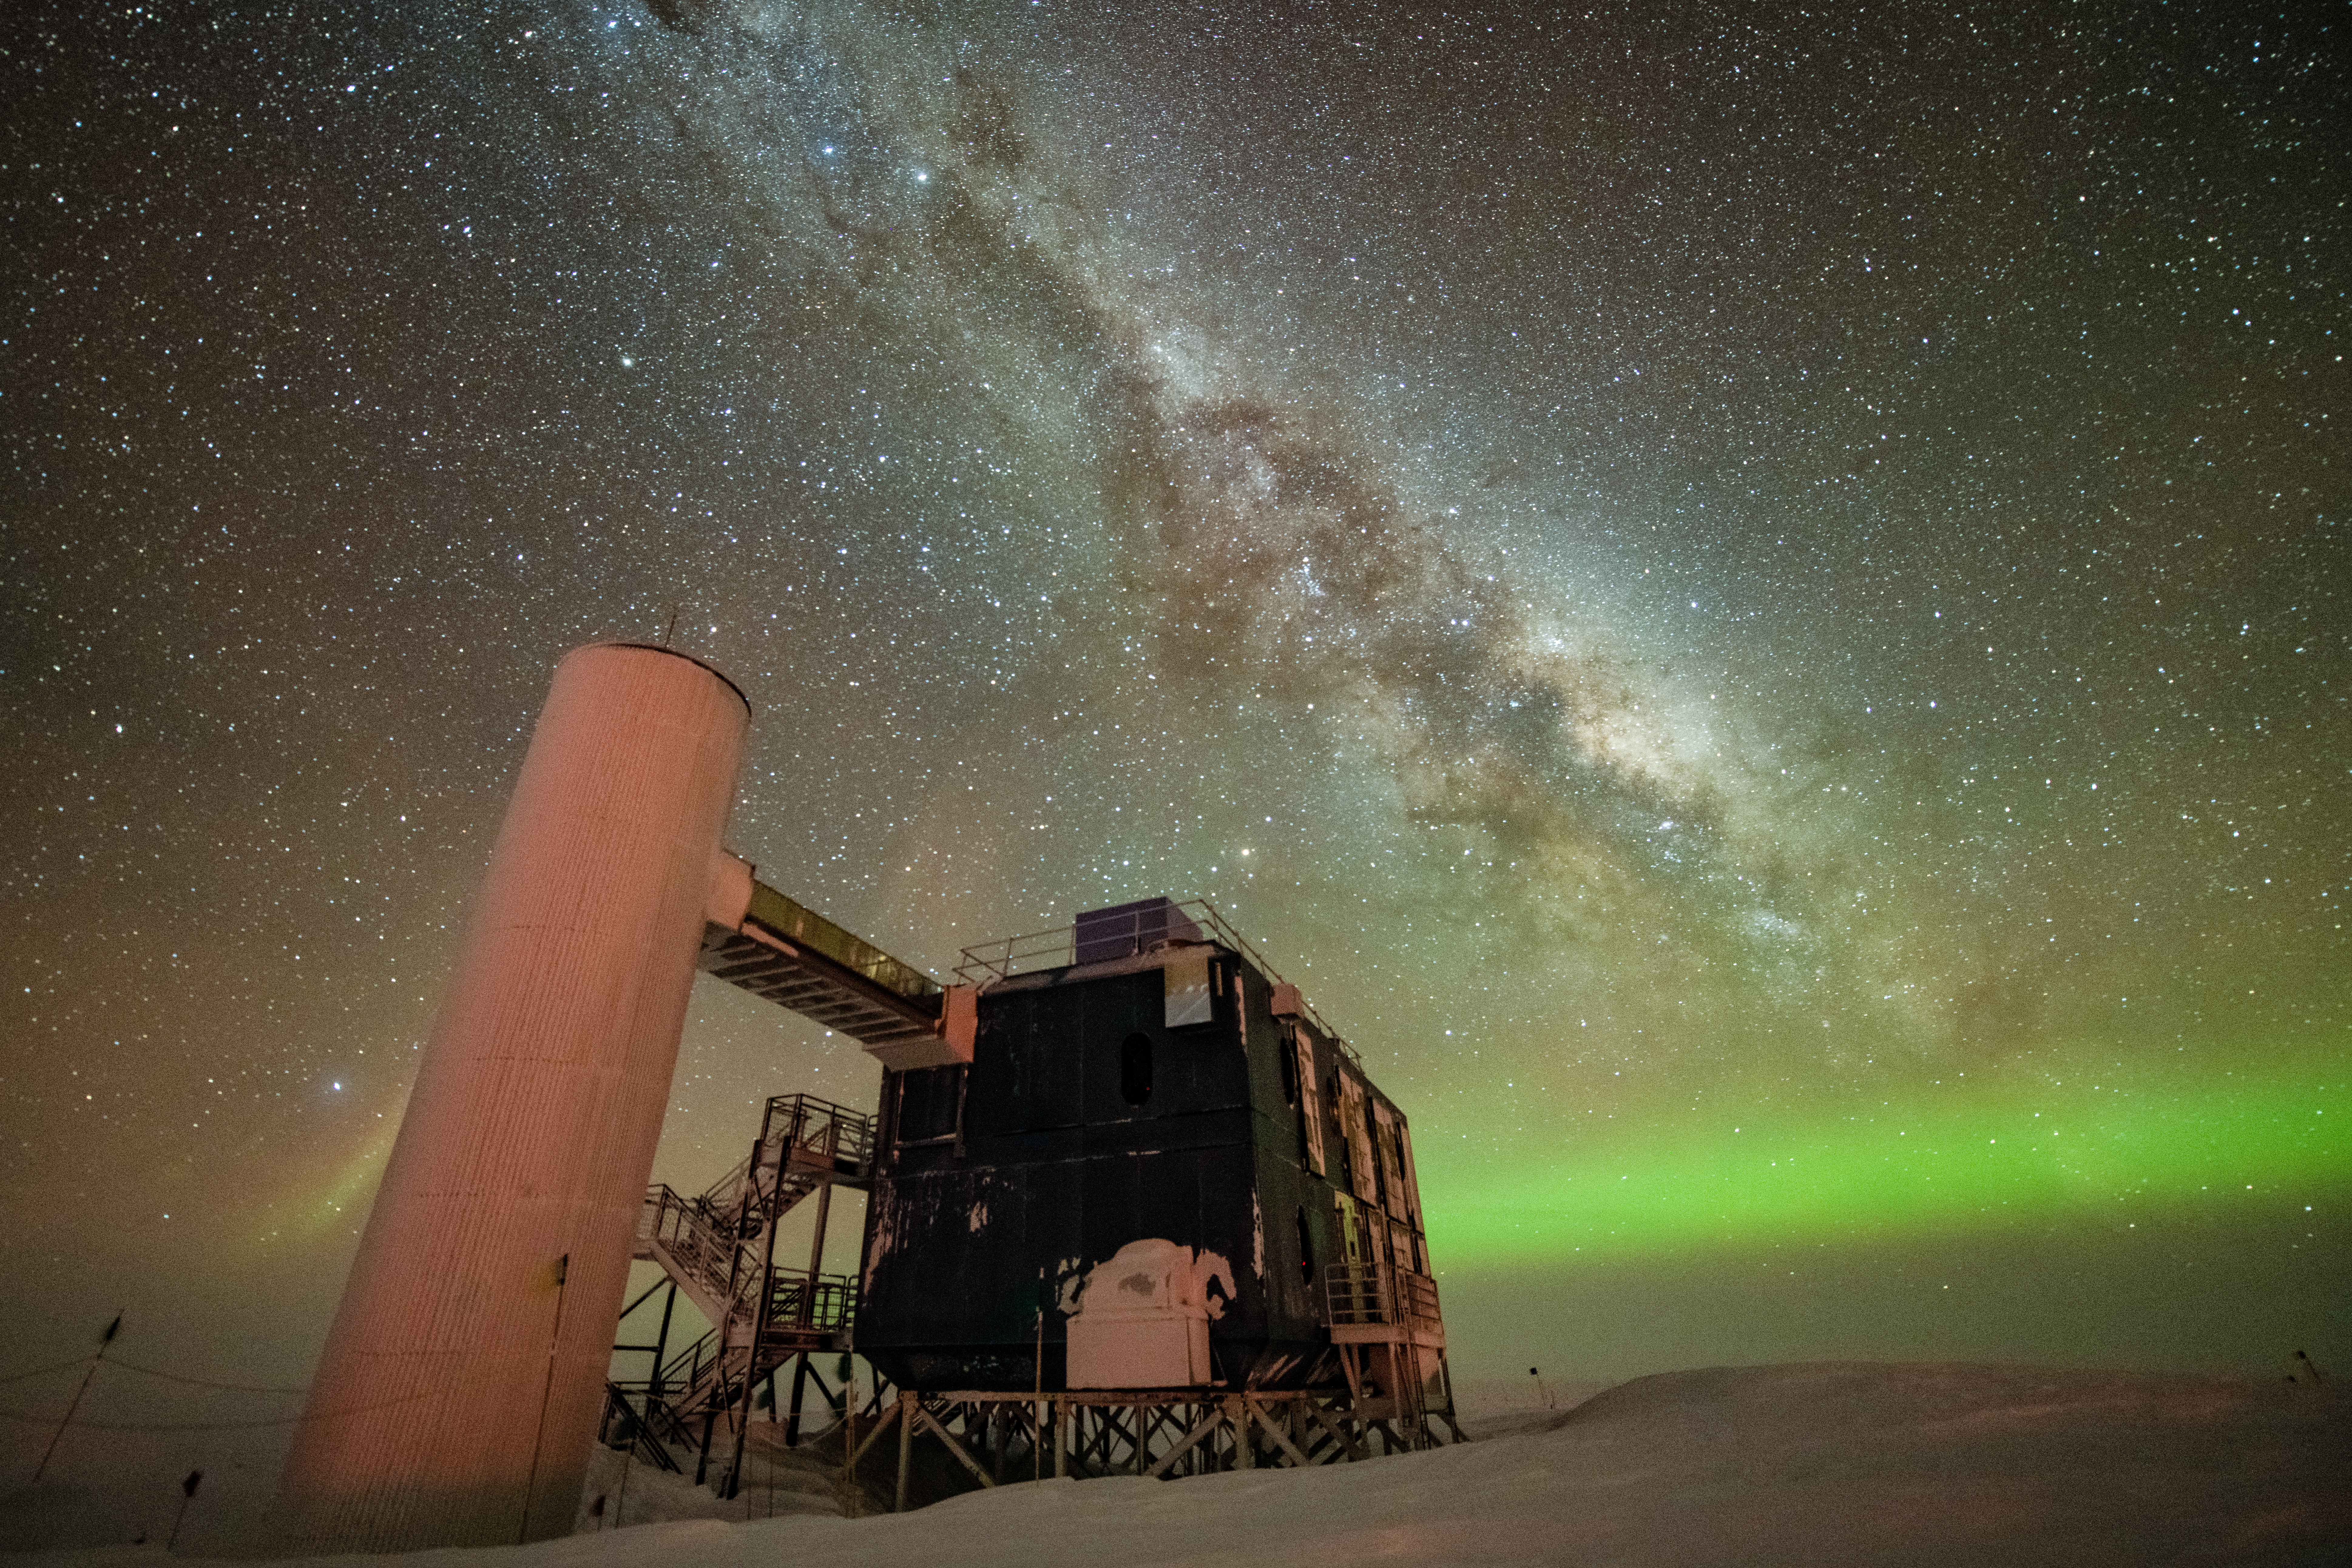 The IceCube Lab is seen with a starry, night sky and Milky Way in the backdrop over the northern lights